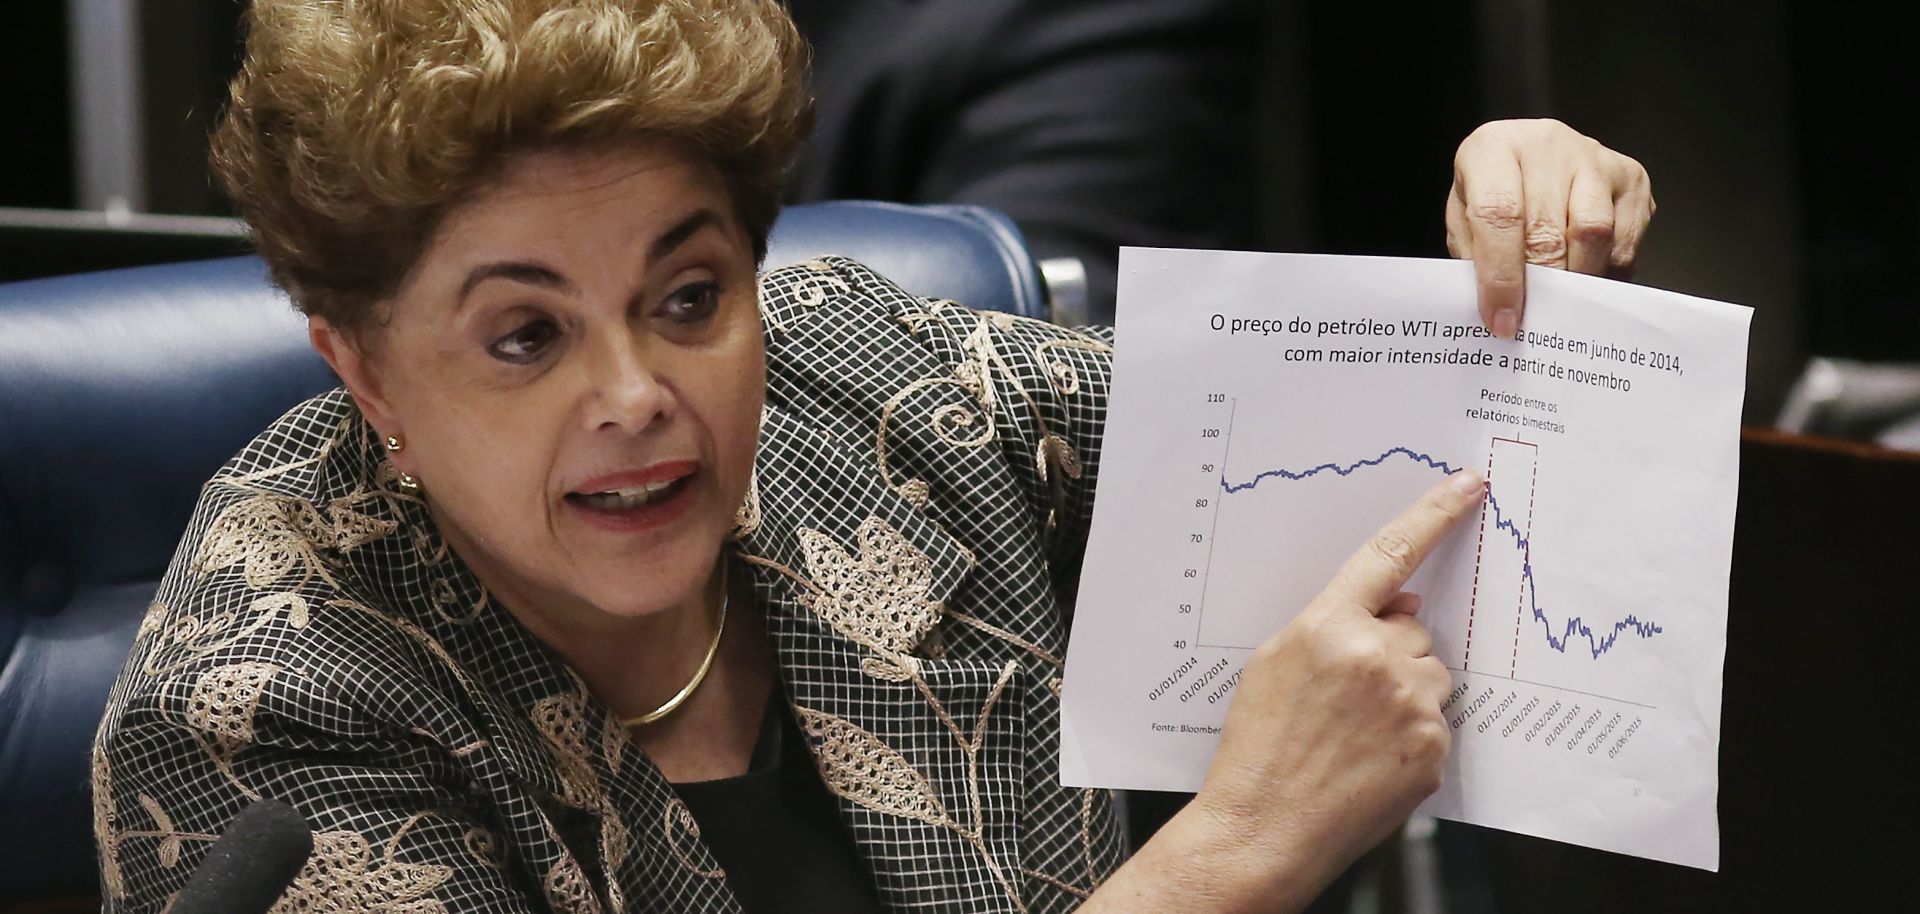 Suspended President Dilma Rousseff points to an economic chart displaying oil prices while answering a question from a senator on the Senate floor during her impeachment trial on Aug. 29, 2016, in Brasilia.